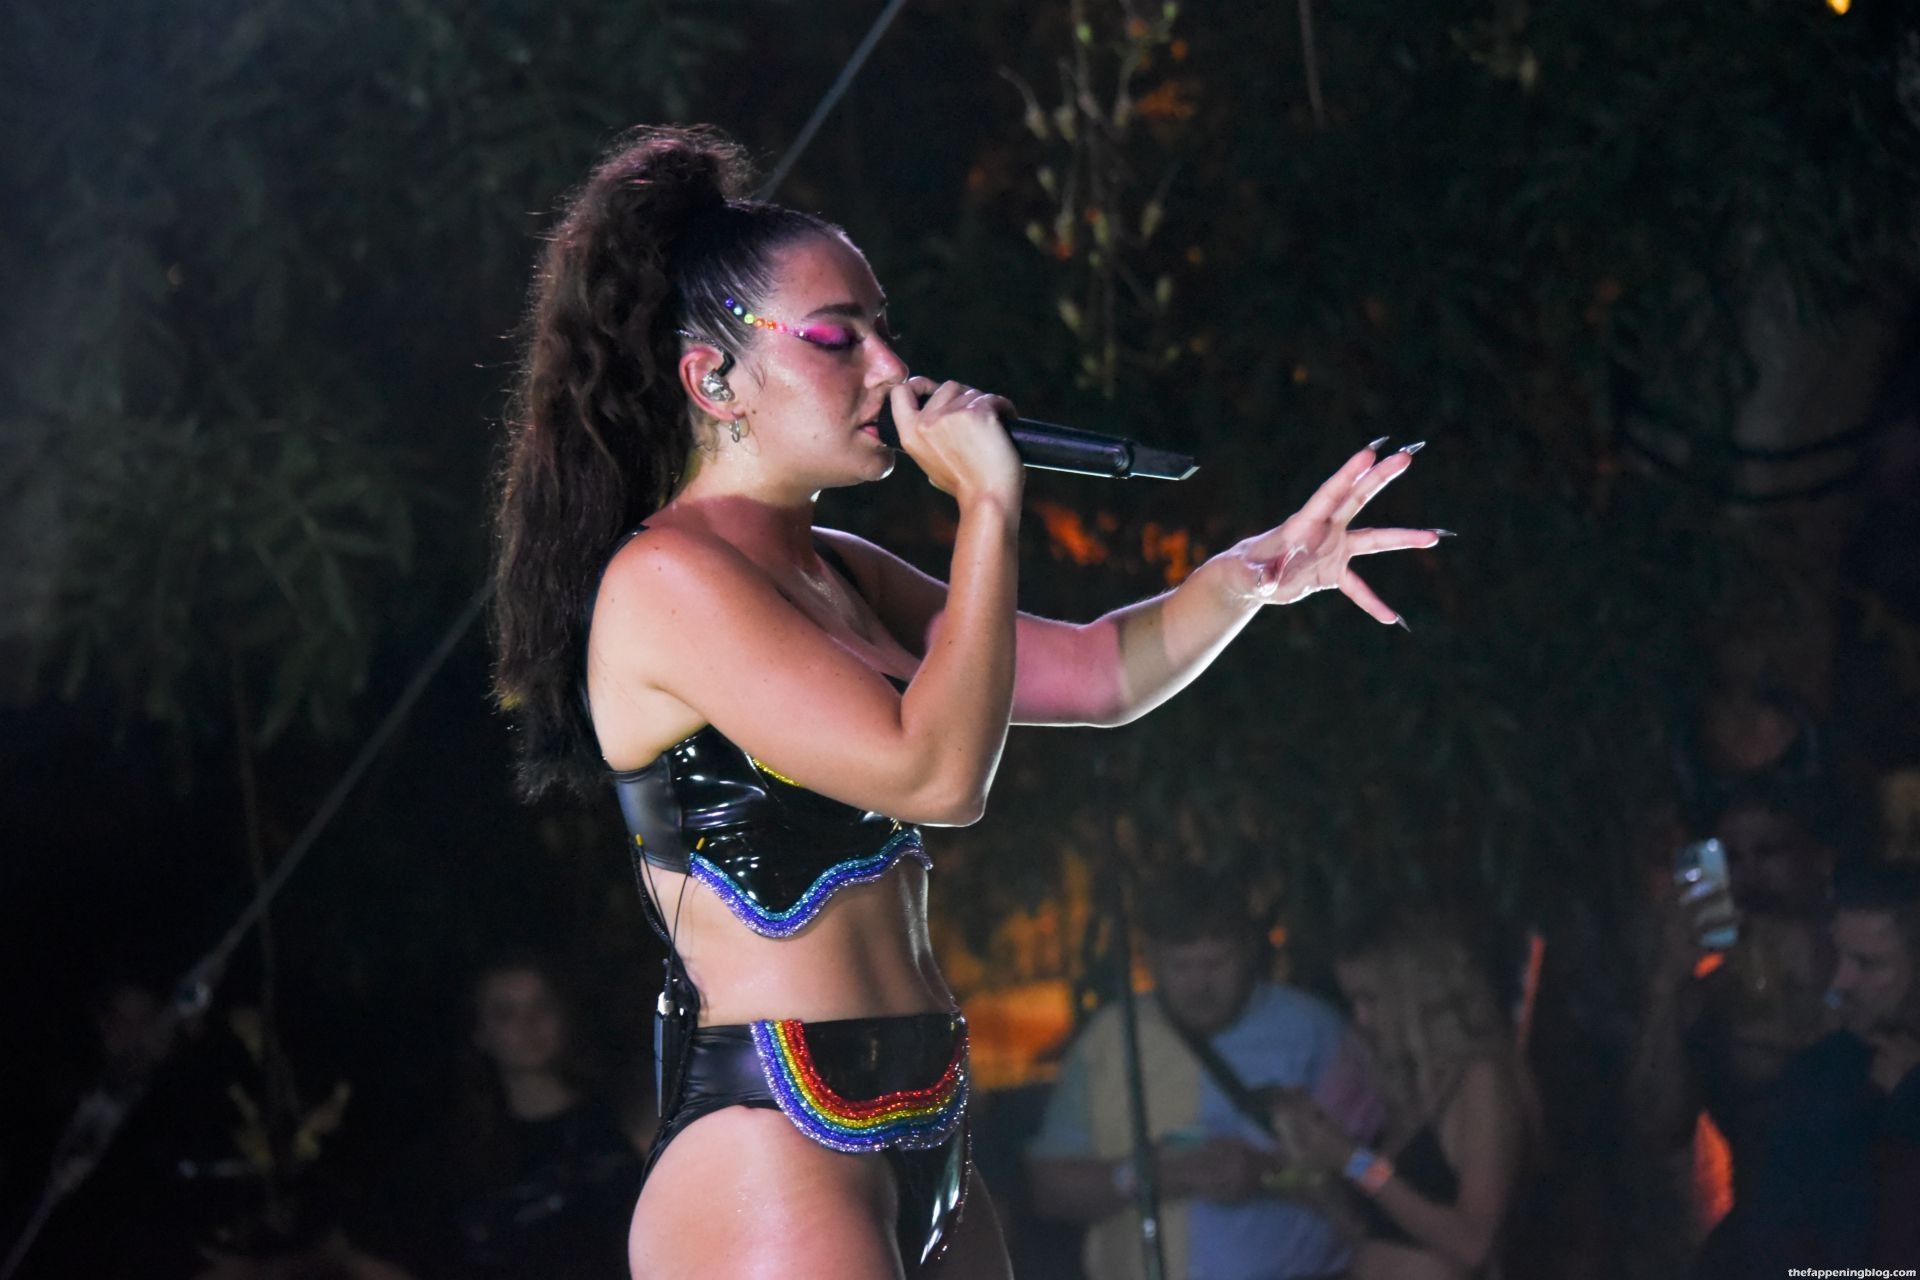 Charli-XCX-Sexy-on-Stage-6-thefappeningblog.com_.jpg